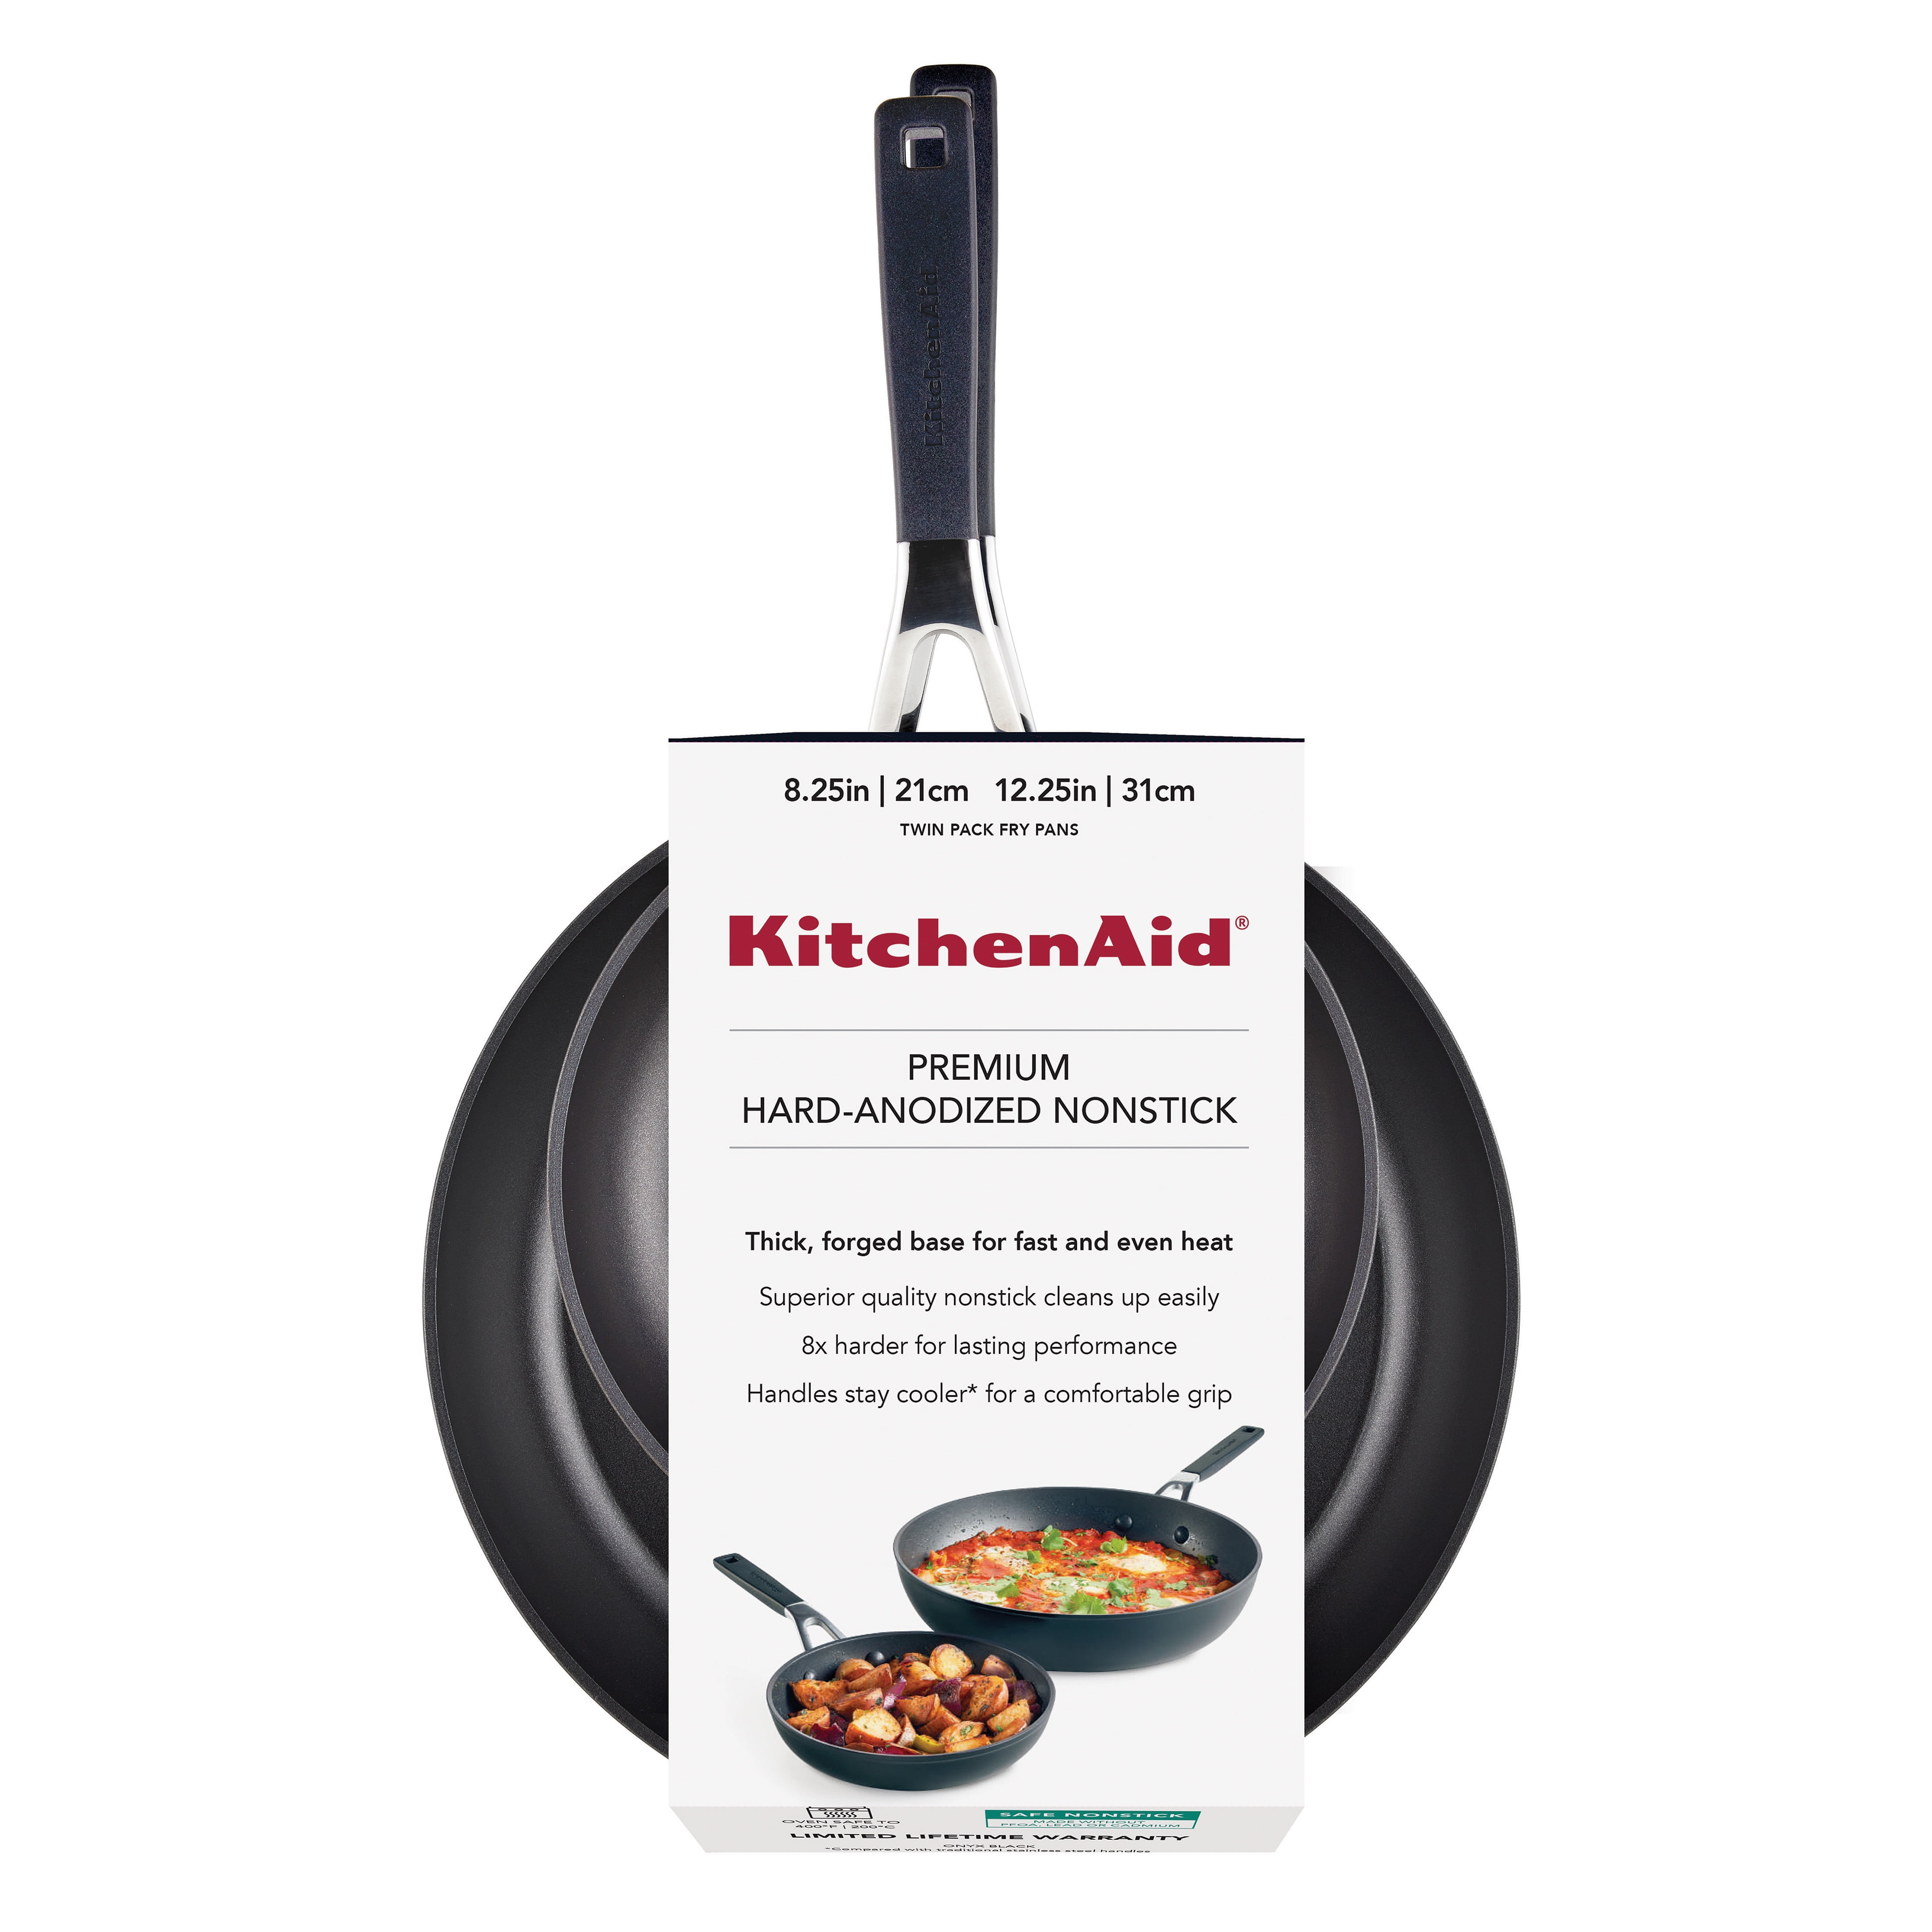 11.25 Round Cast Iron Pizza & Crepe Pan / Skillet with Handle (1 Skillet)  by MyXOHome, 1 - Fry's Food Stores